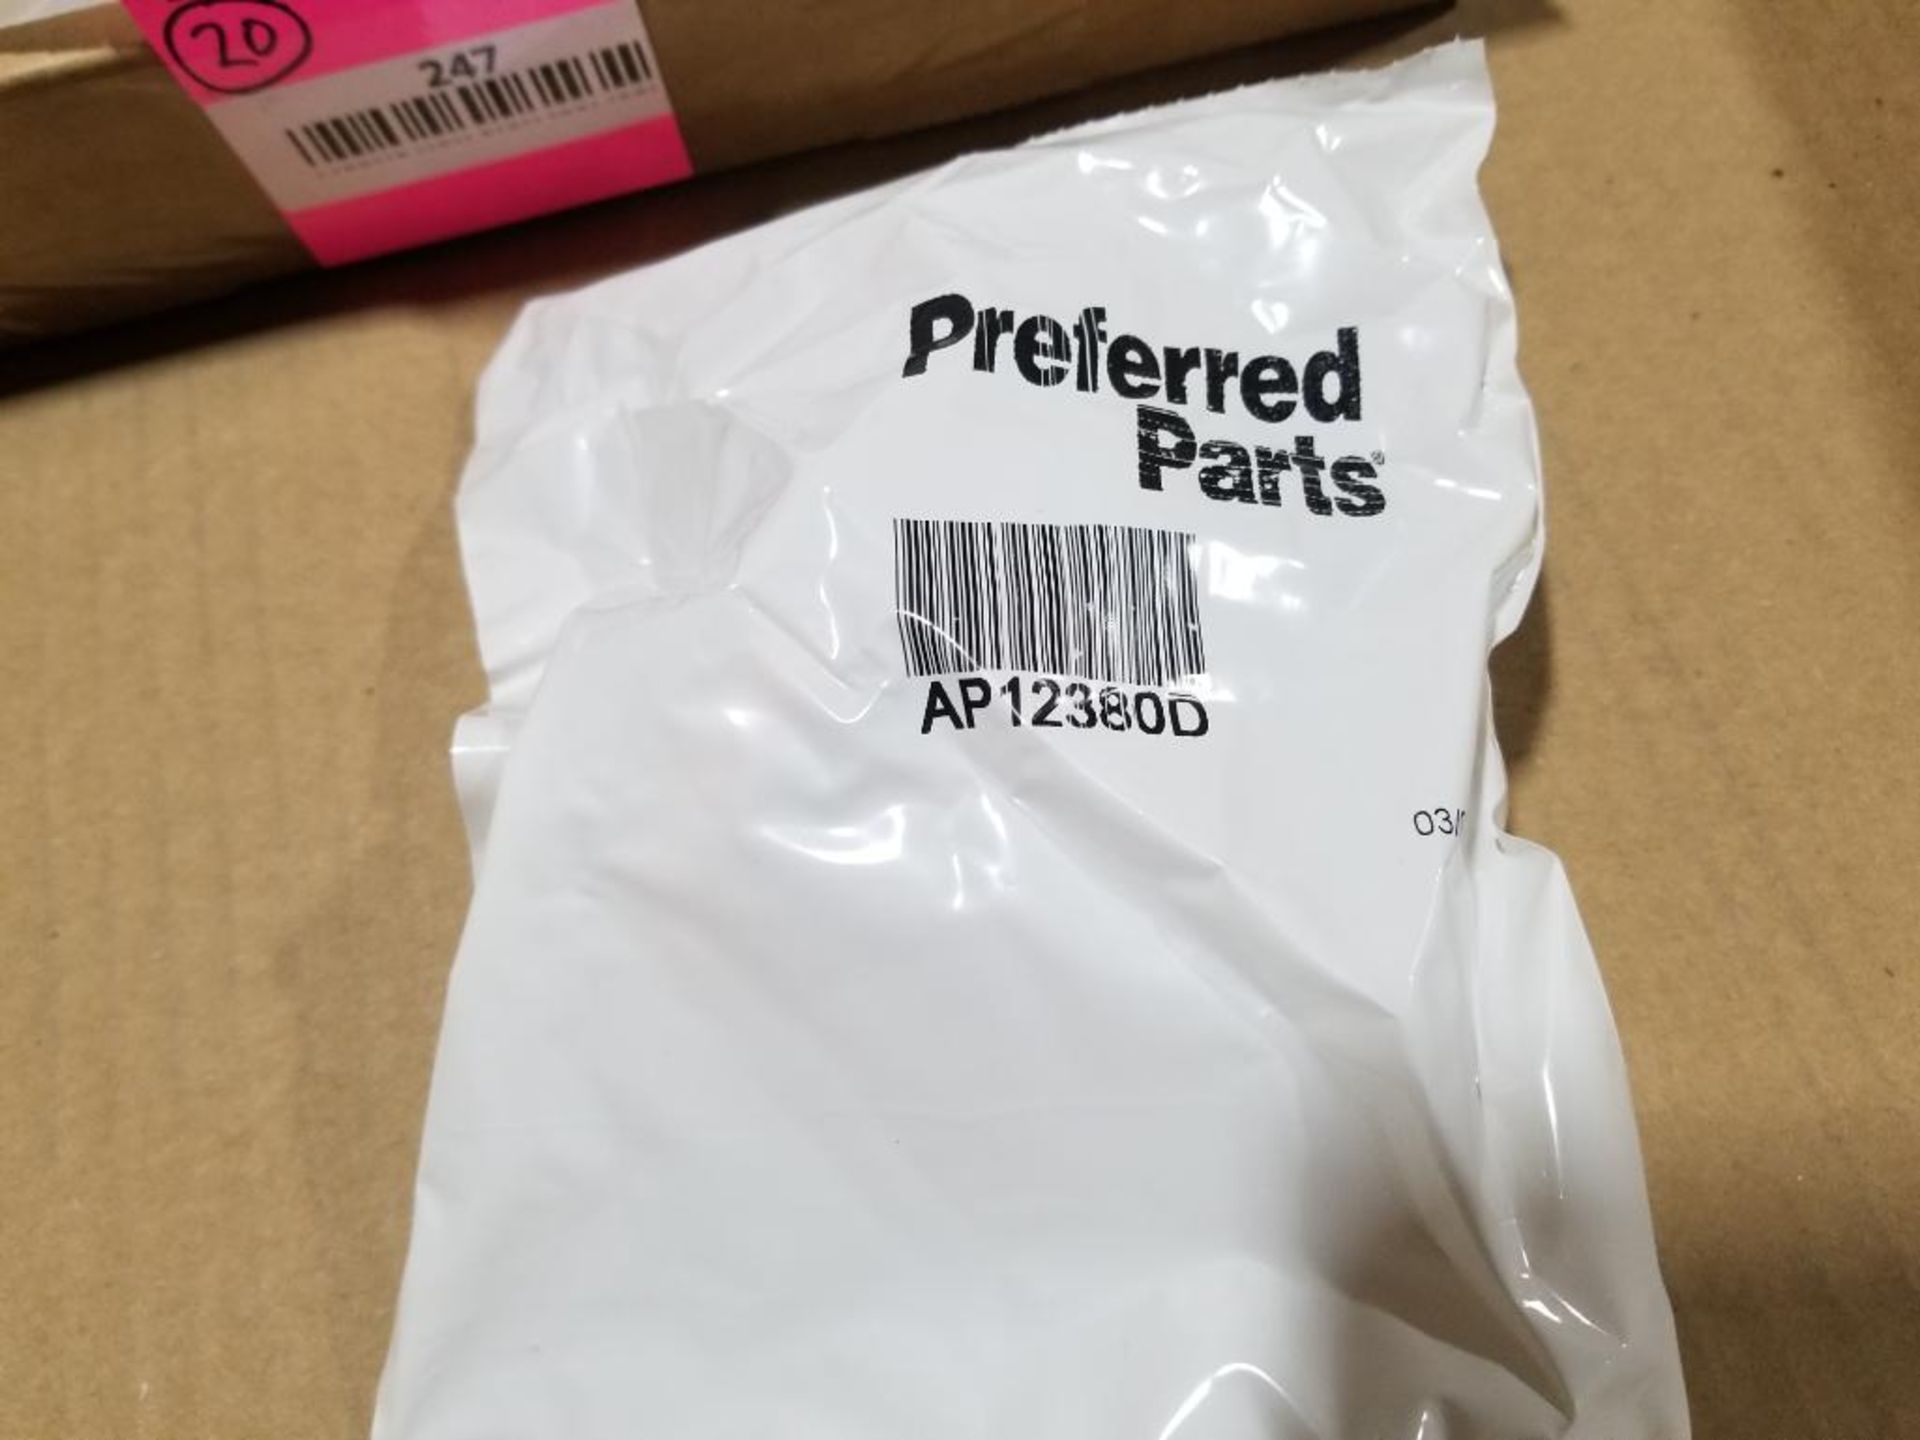 Qty 20 - Preferred Parts. Part number AP12380D. - Image 2 of 5